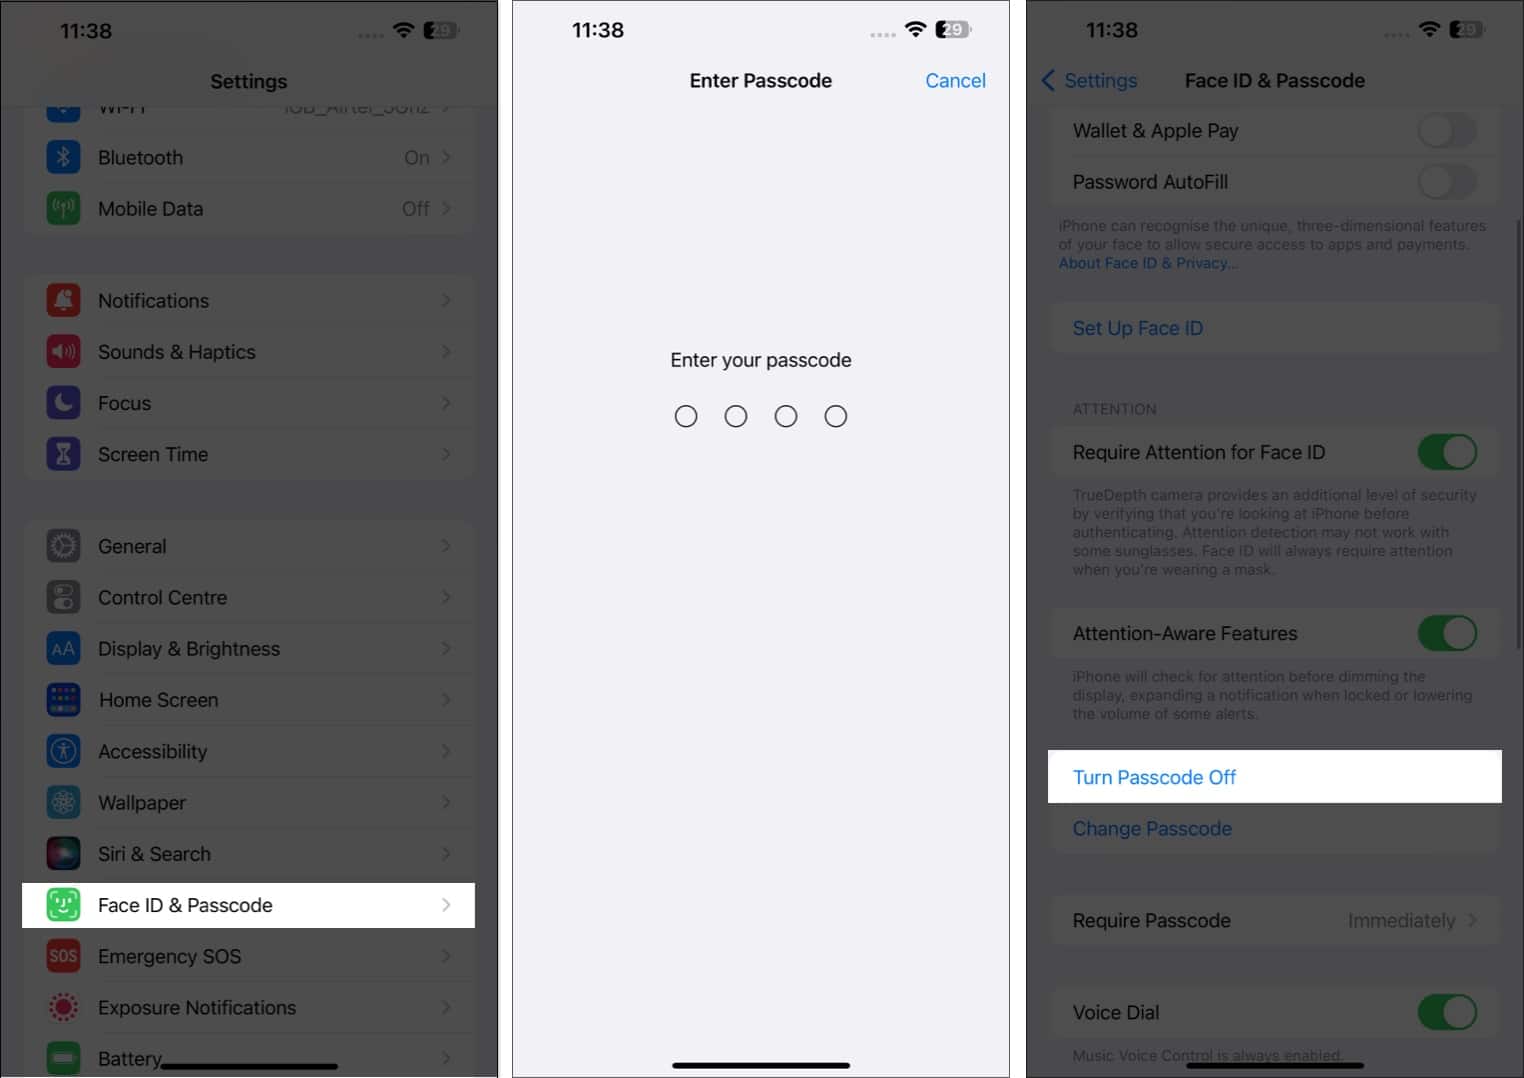 Access face ID and Passcode, enter device passcode, choose turn passcode off in settings app